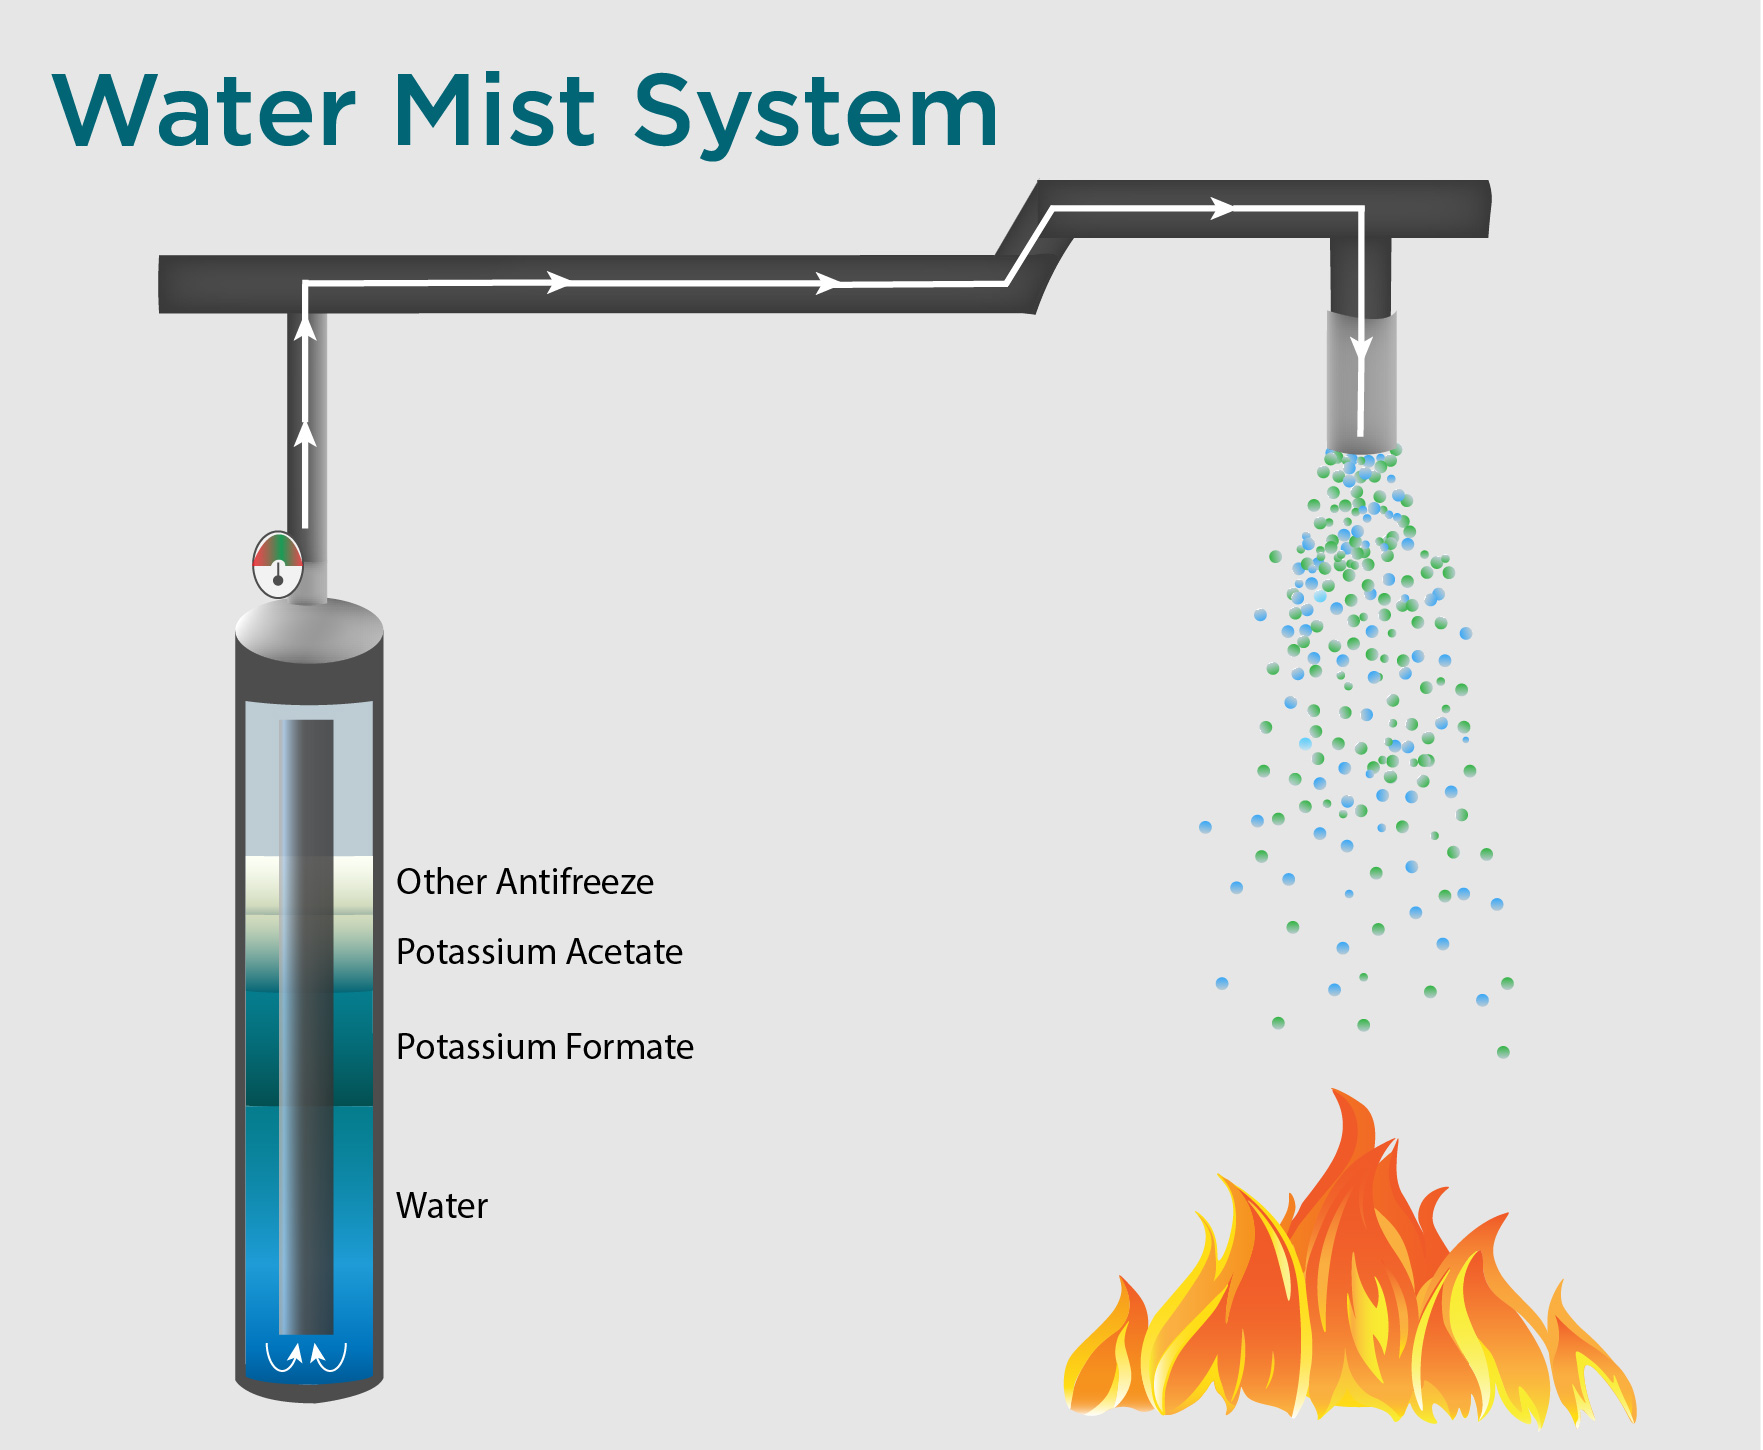 What are water mist fire suppression agents?